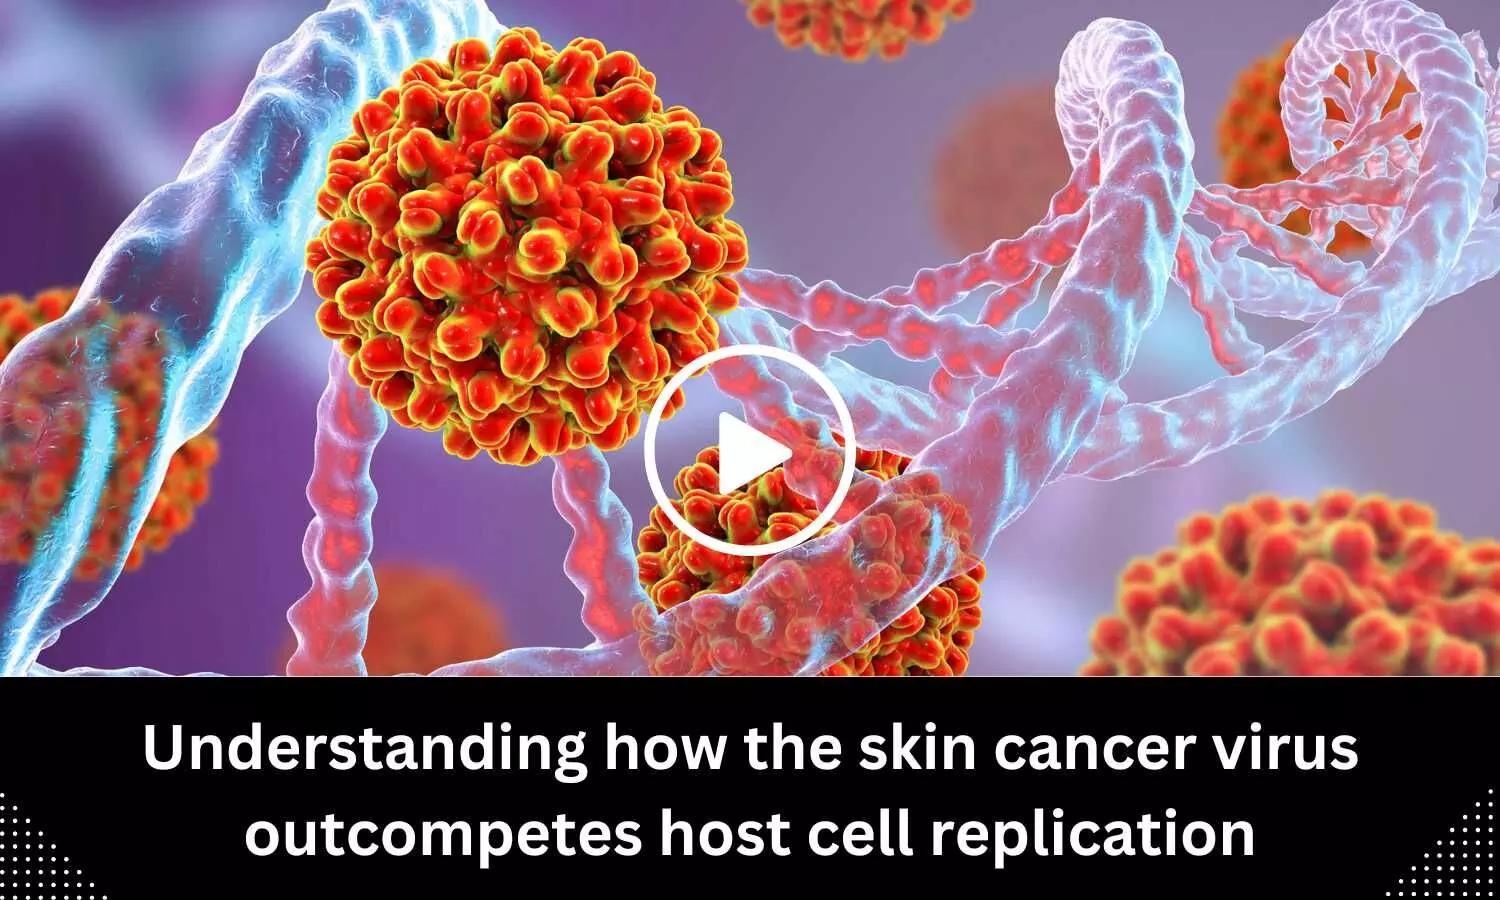 Understanding how the skin cancer virus outcompetes host cell replication